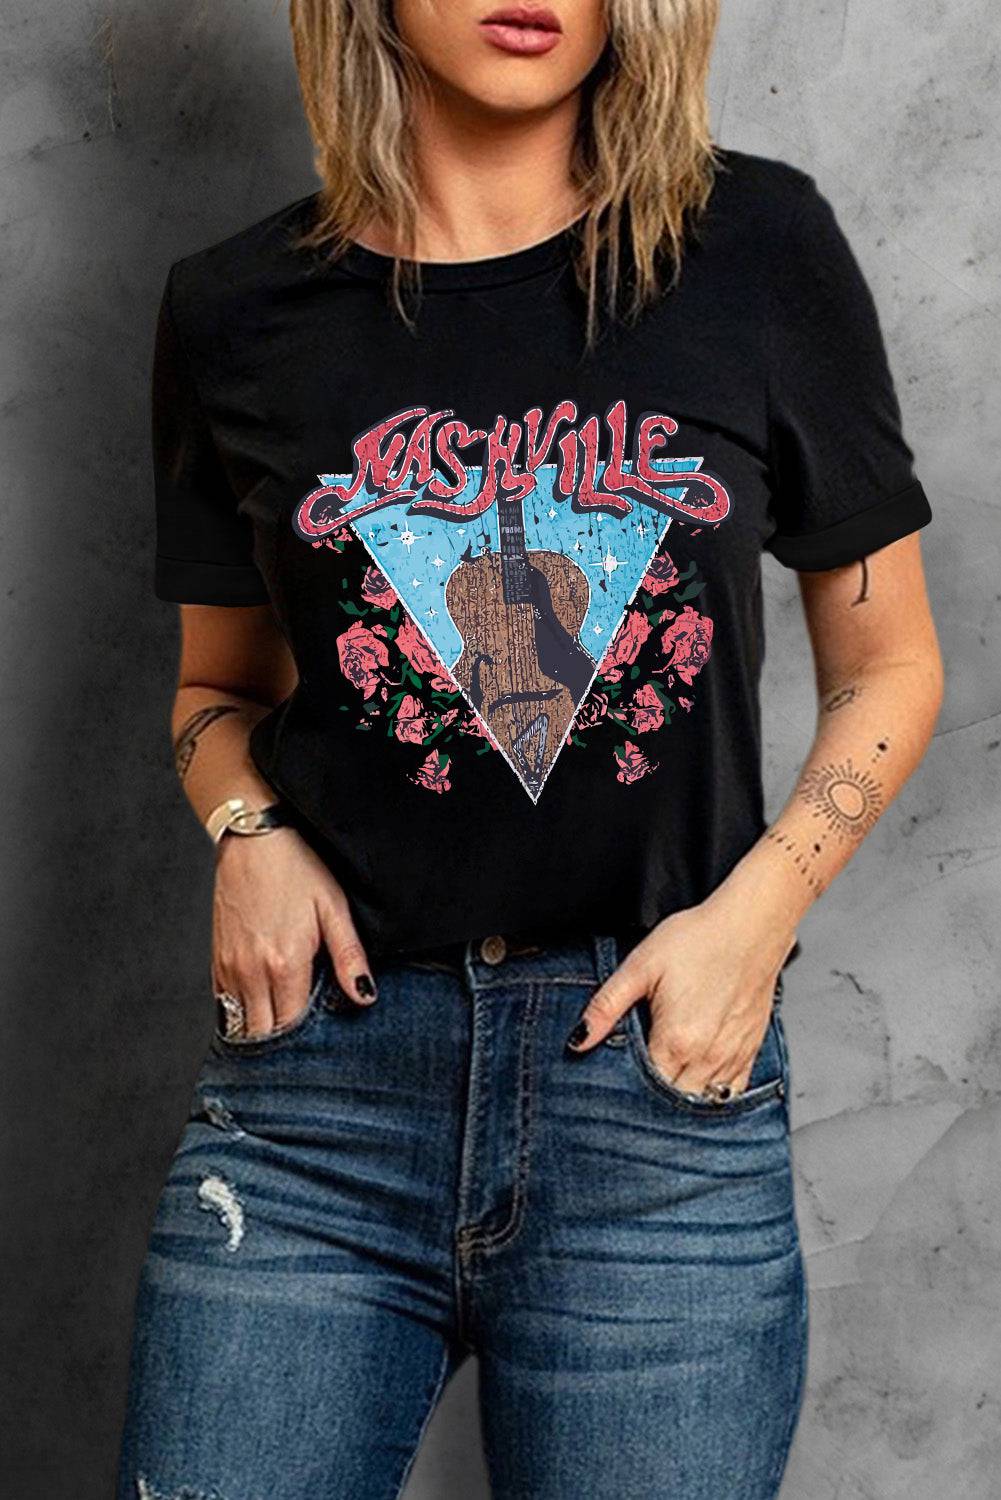 Nashville Nights - Embrace the Tender Touch of Our Graphic Tee - Let Your Heart Sing with Free-Spirited Style - Guy Christopher